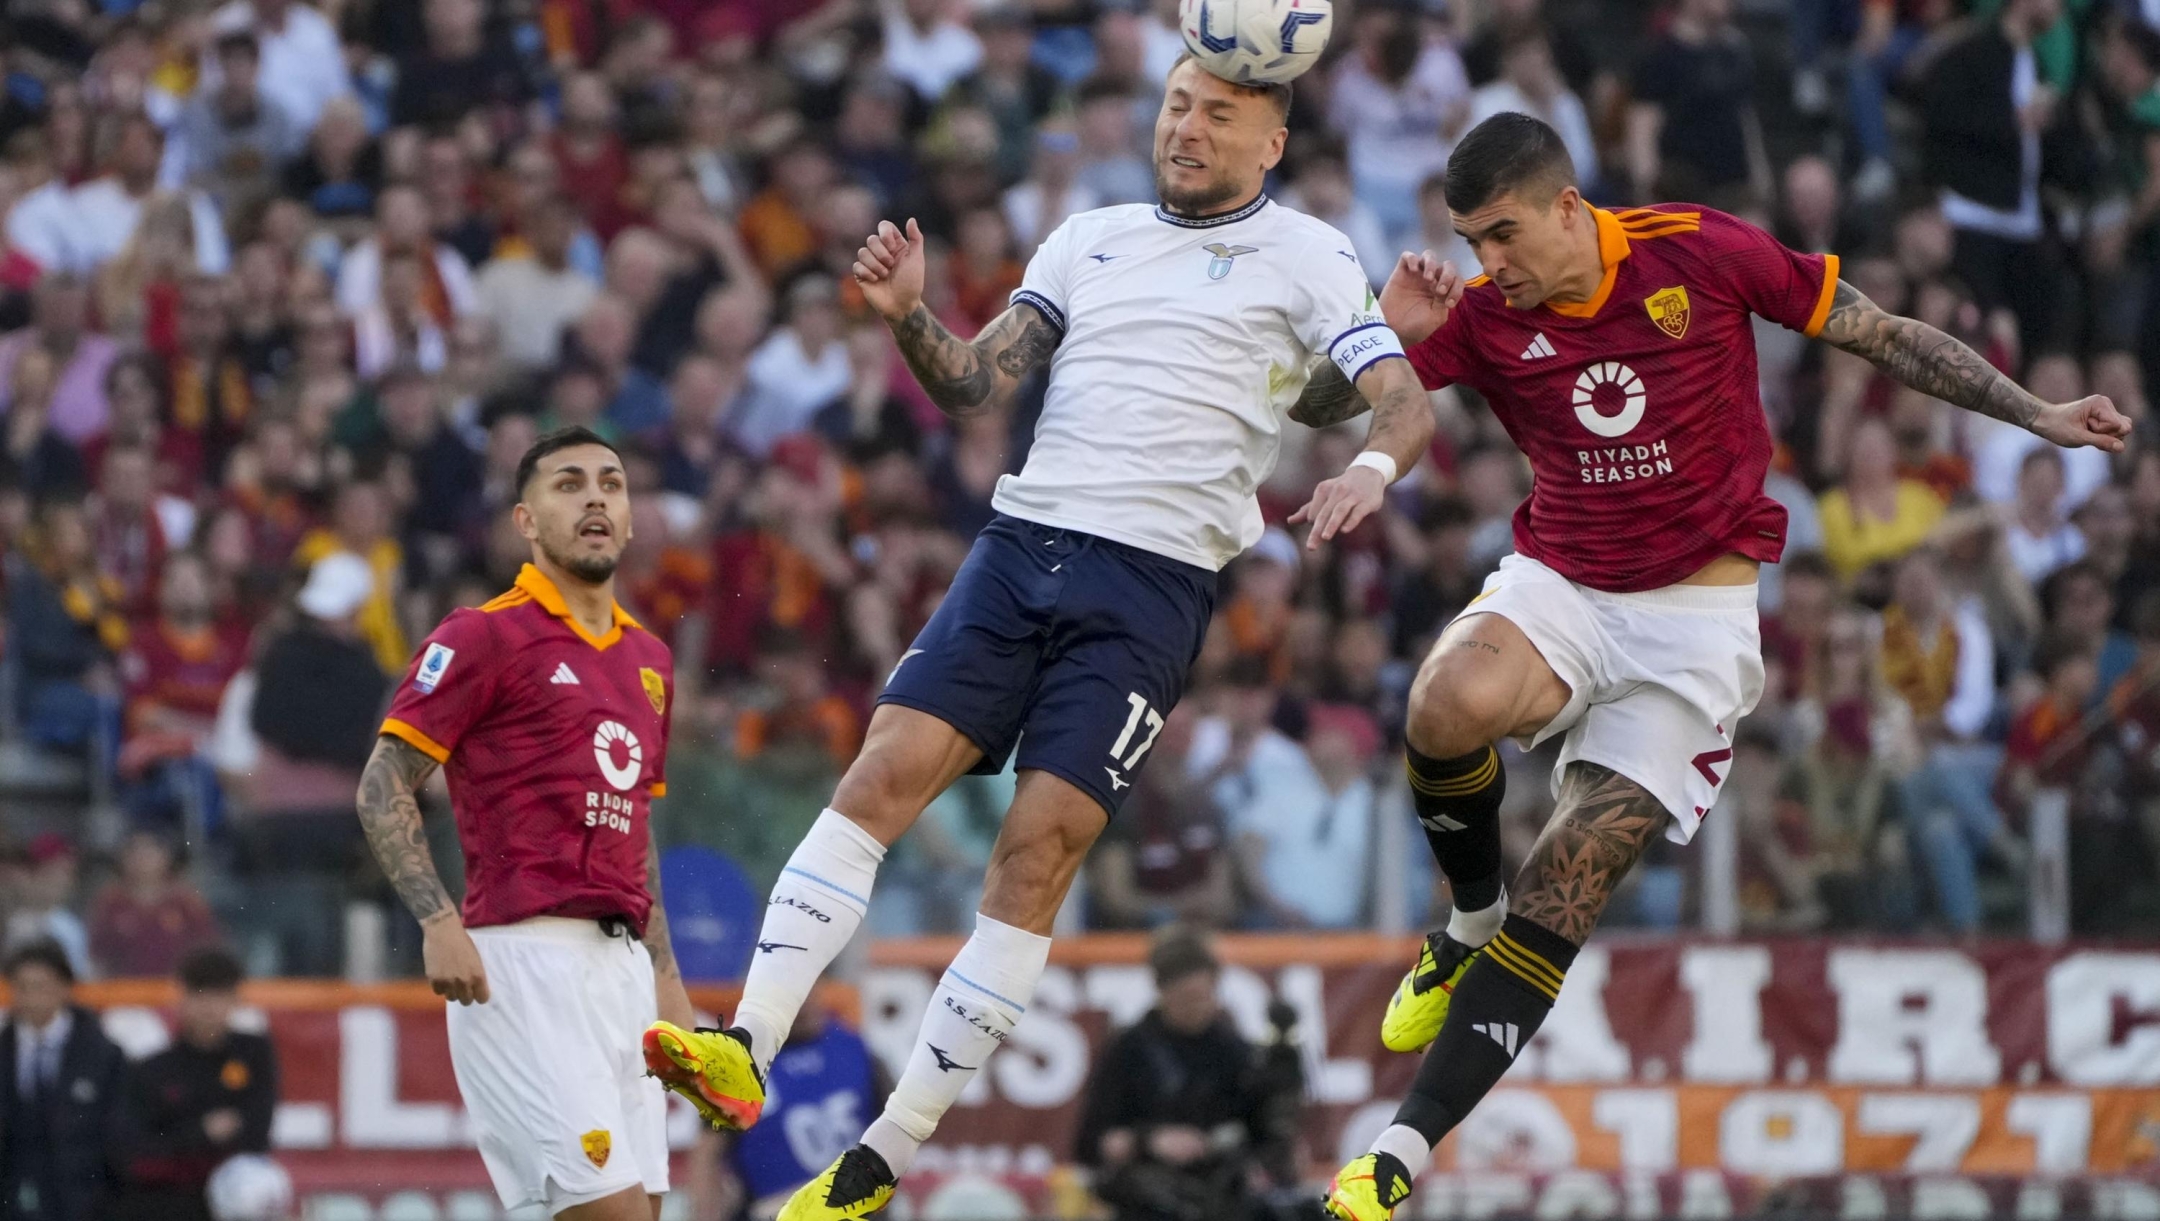 Lazio's Ciro Immobile, center, jumps for the ball with Roma's Gianluca Mancini during a Serie A soccer match between Roma and Lazio, at Stadio Olimpico, in Rome, Italy, Saturday, April 6, 2024. (AP Photo/Gregorio Borgia)